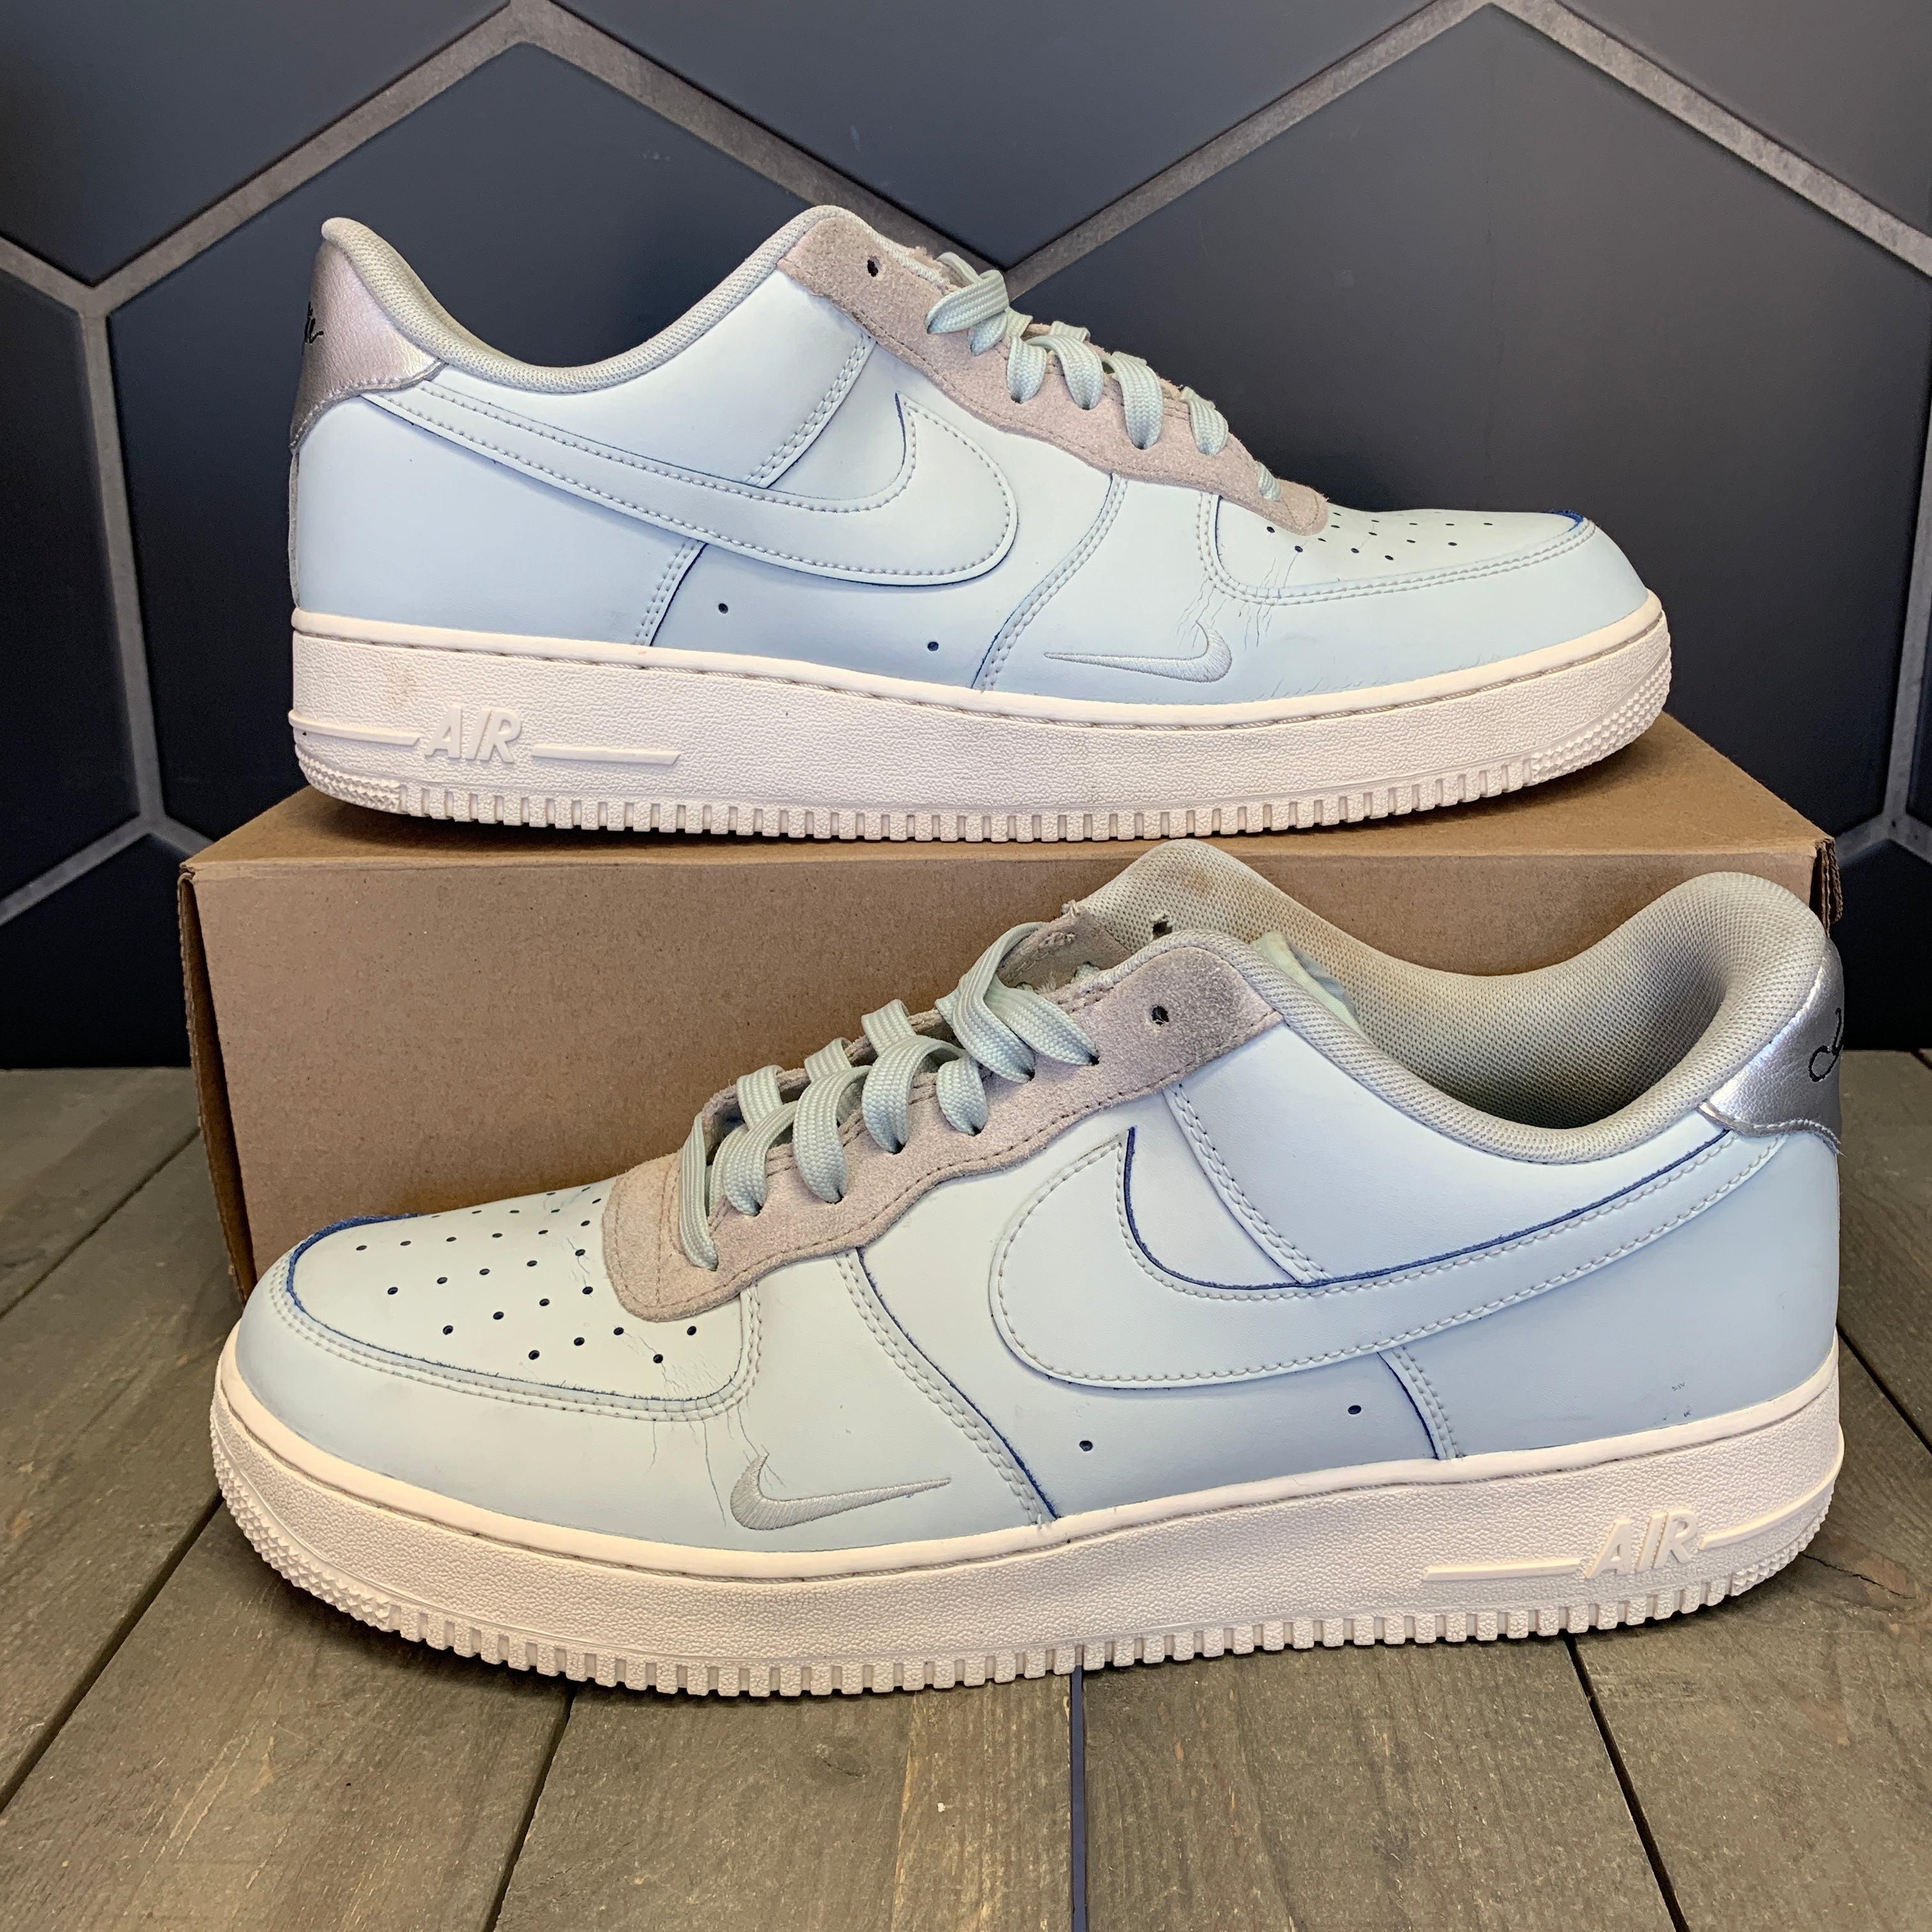 devin booker's air force 1